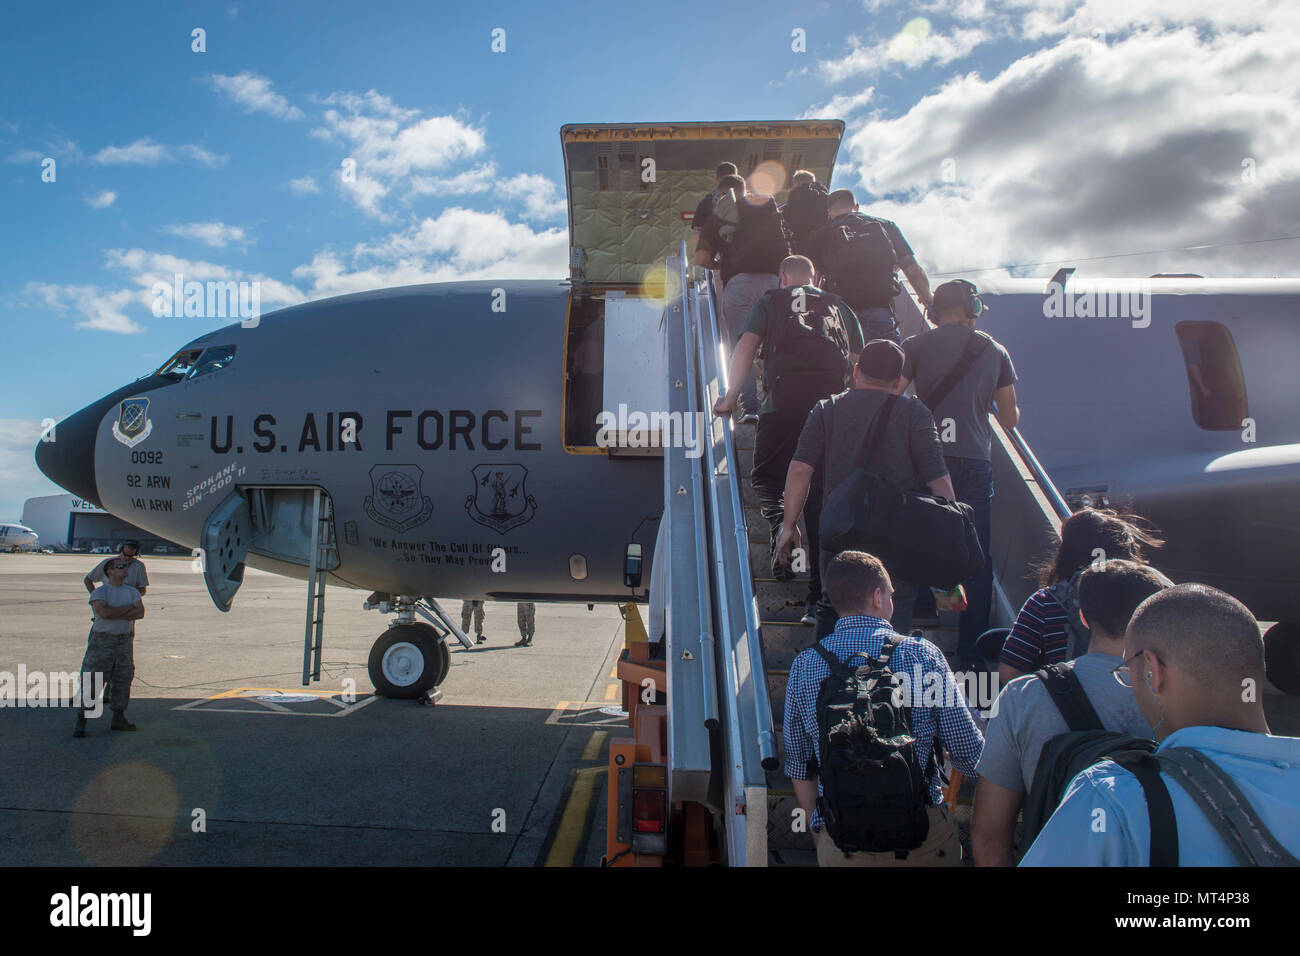 Pacific Angel (PACANGEL) 17-3 main body personnel board a U.S. Air Force KC-135 Stratotanker, assigned to the 92nd Air Refueling Wing from Fairchild Air Force Base, Wash., for their return flight home at the airport in Nadi, Fiji, July 25, 2017. The active duty KC-135, flown by a crew completely comprised of Washington Air National Guard Citizen Airmen, provided the primary means of air transportation for PACANGEL 17-3 mission personnel, cargo and supplies. The KC-135 and its crew ensured the operation could execute by sustained rapid global mobility and continuous regional development through Stock Photo